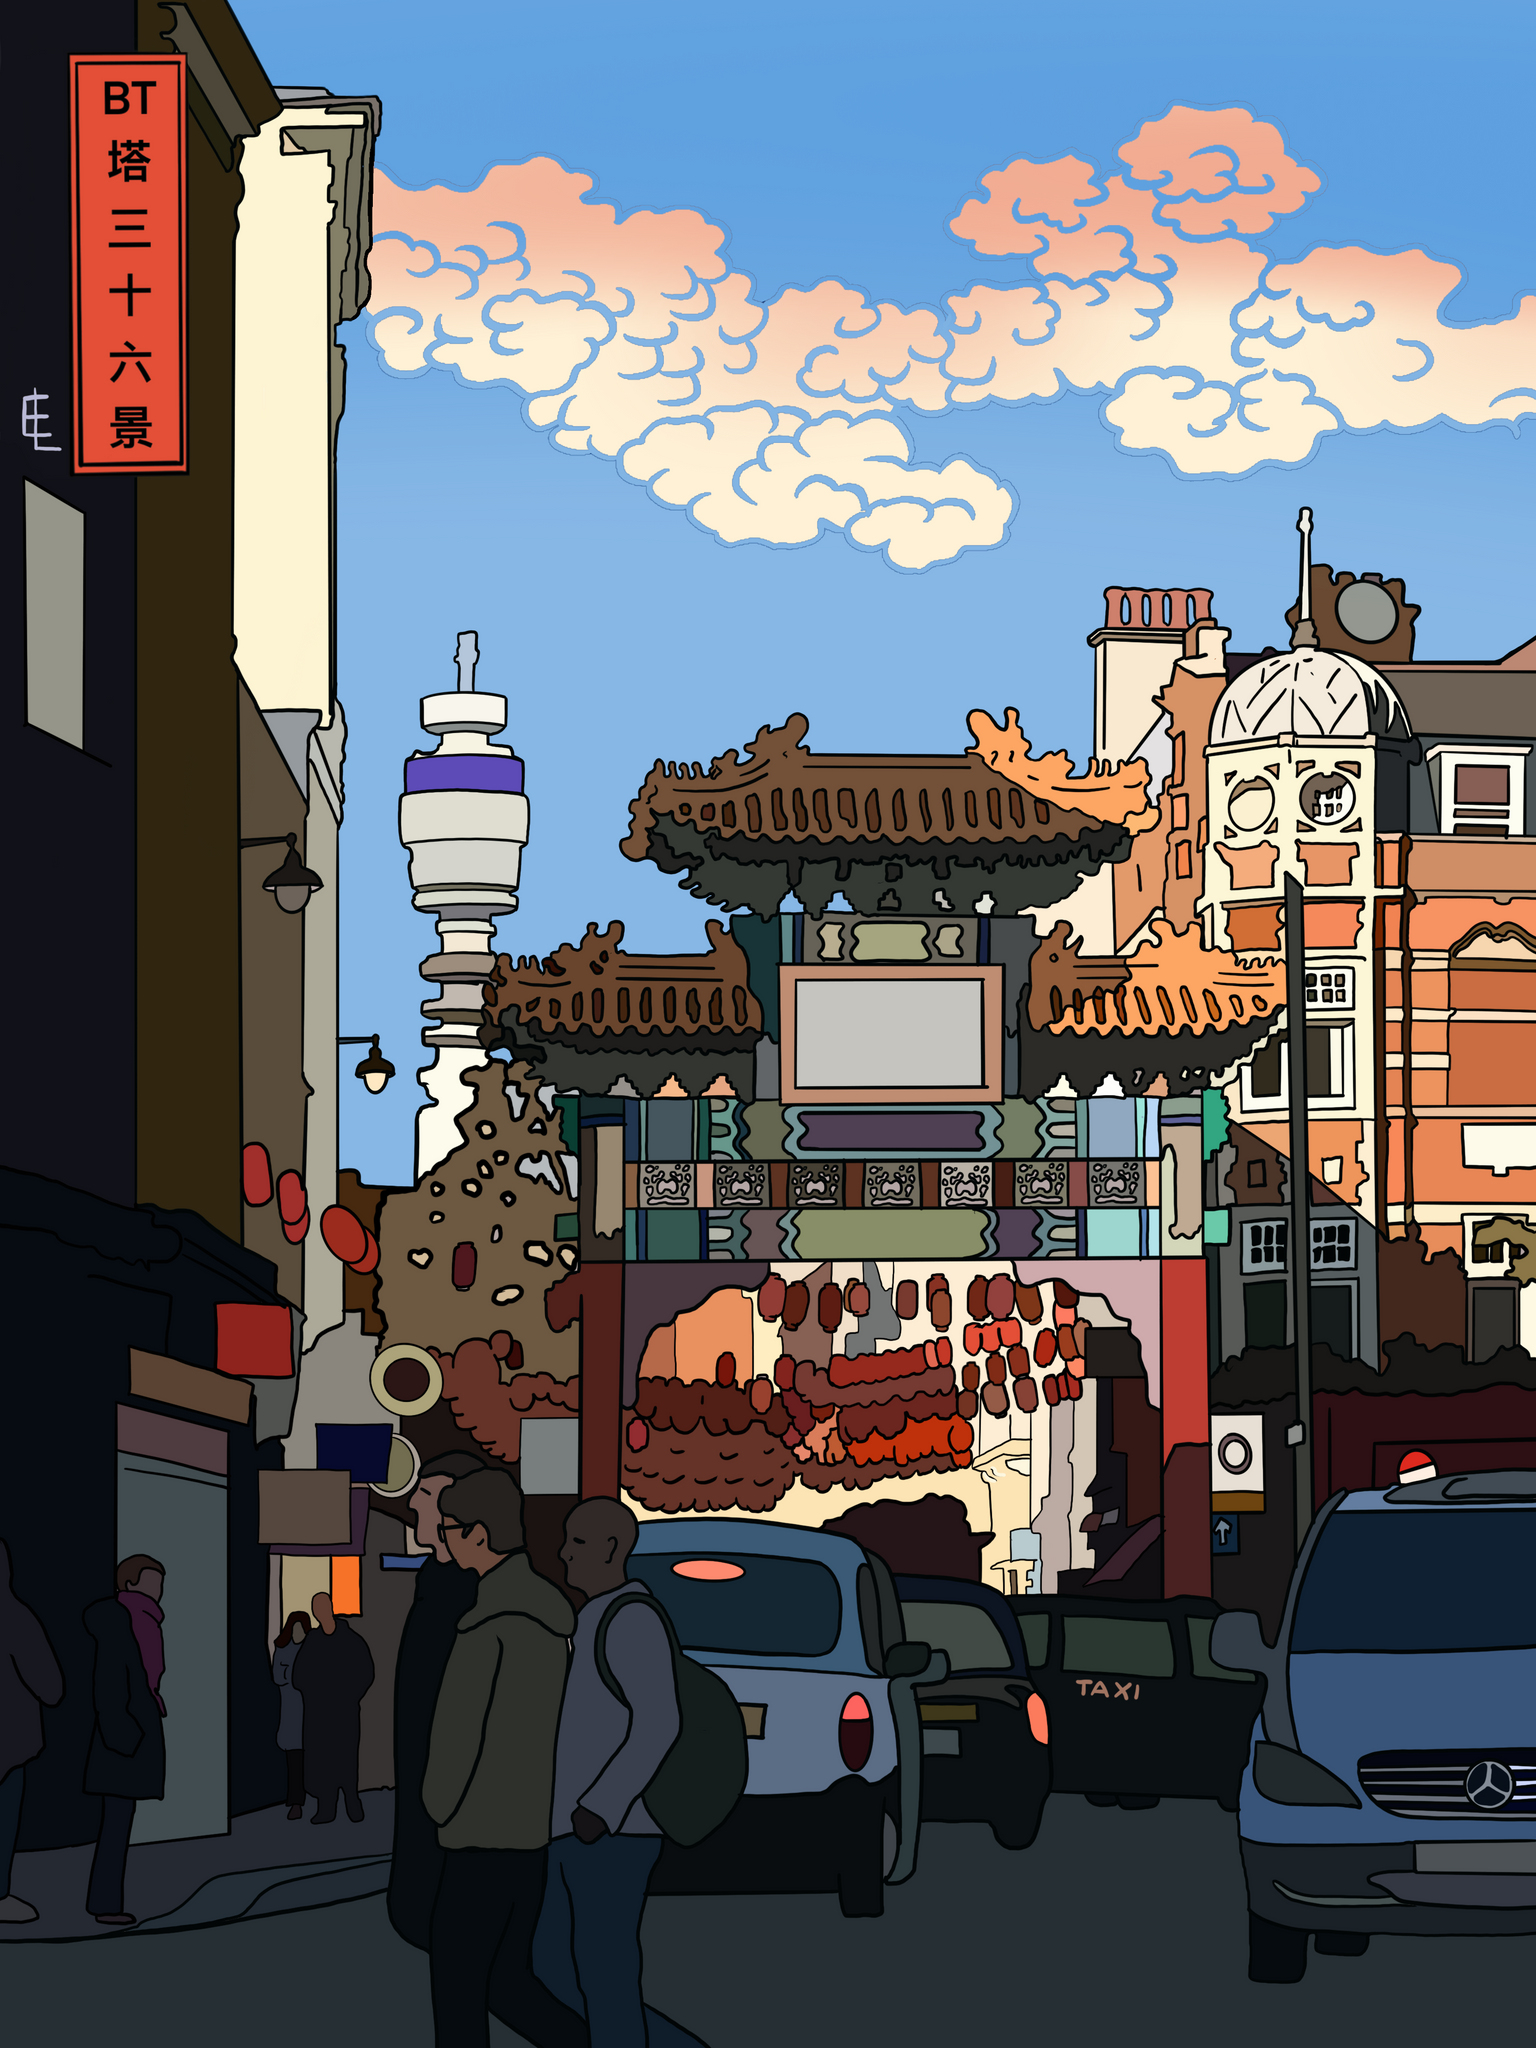 BT Tower From Chinatown